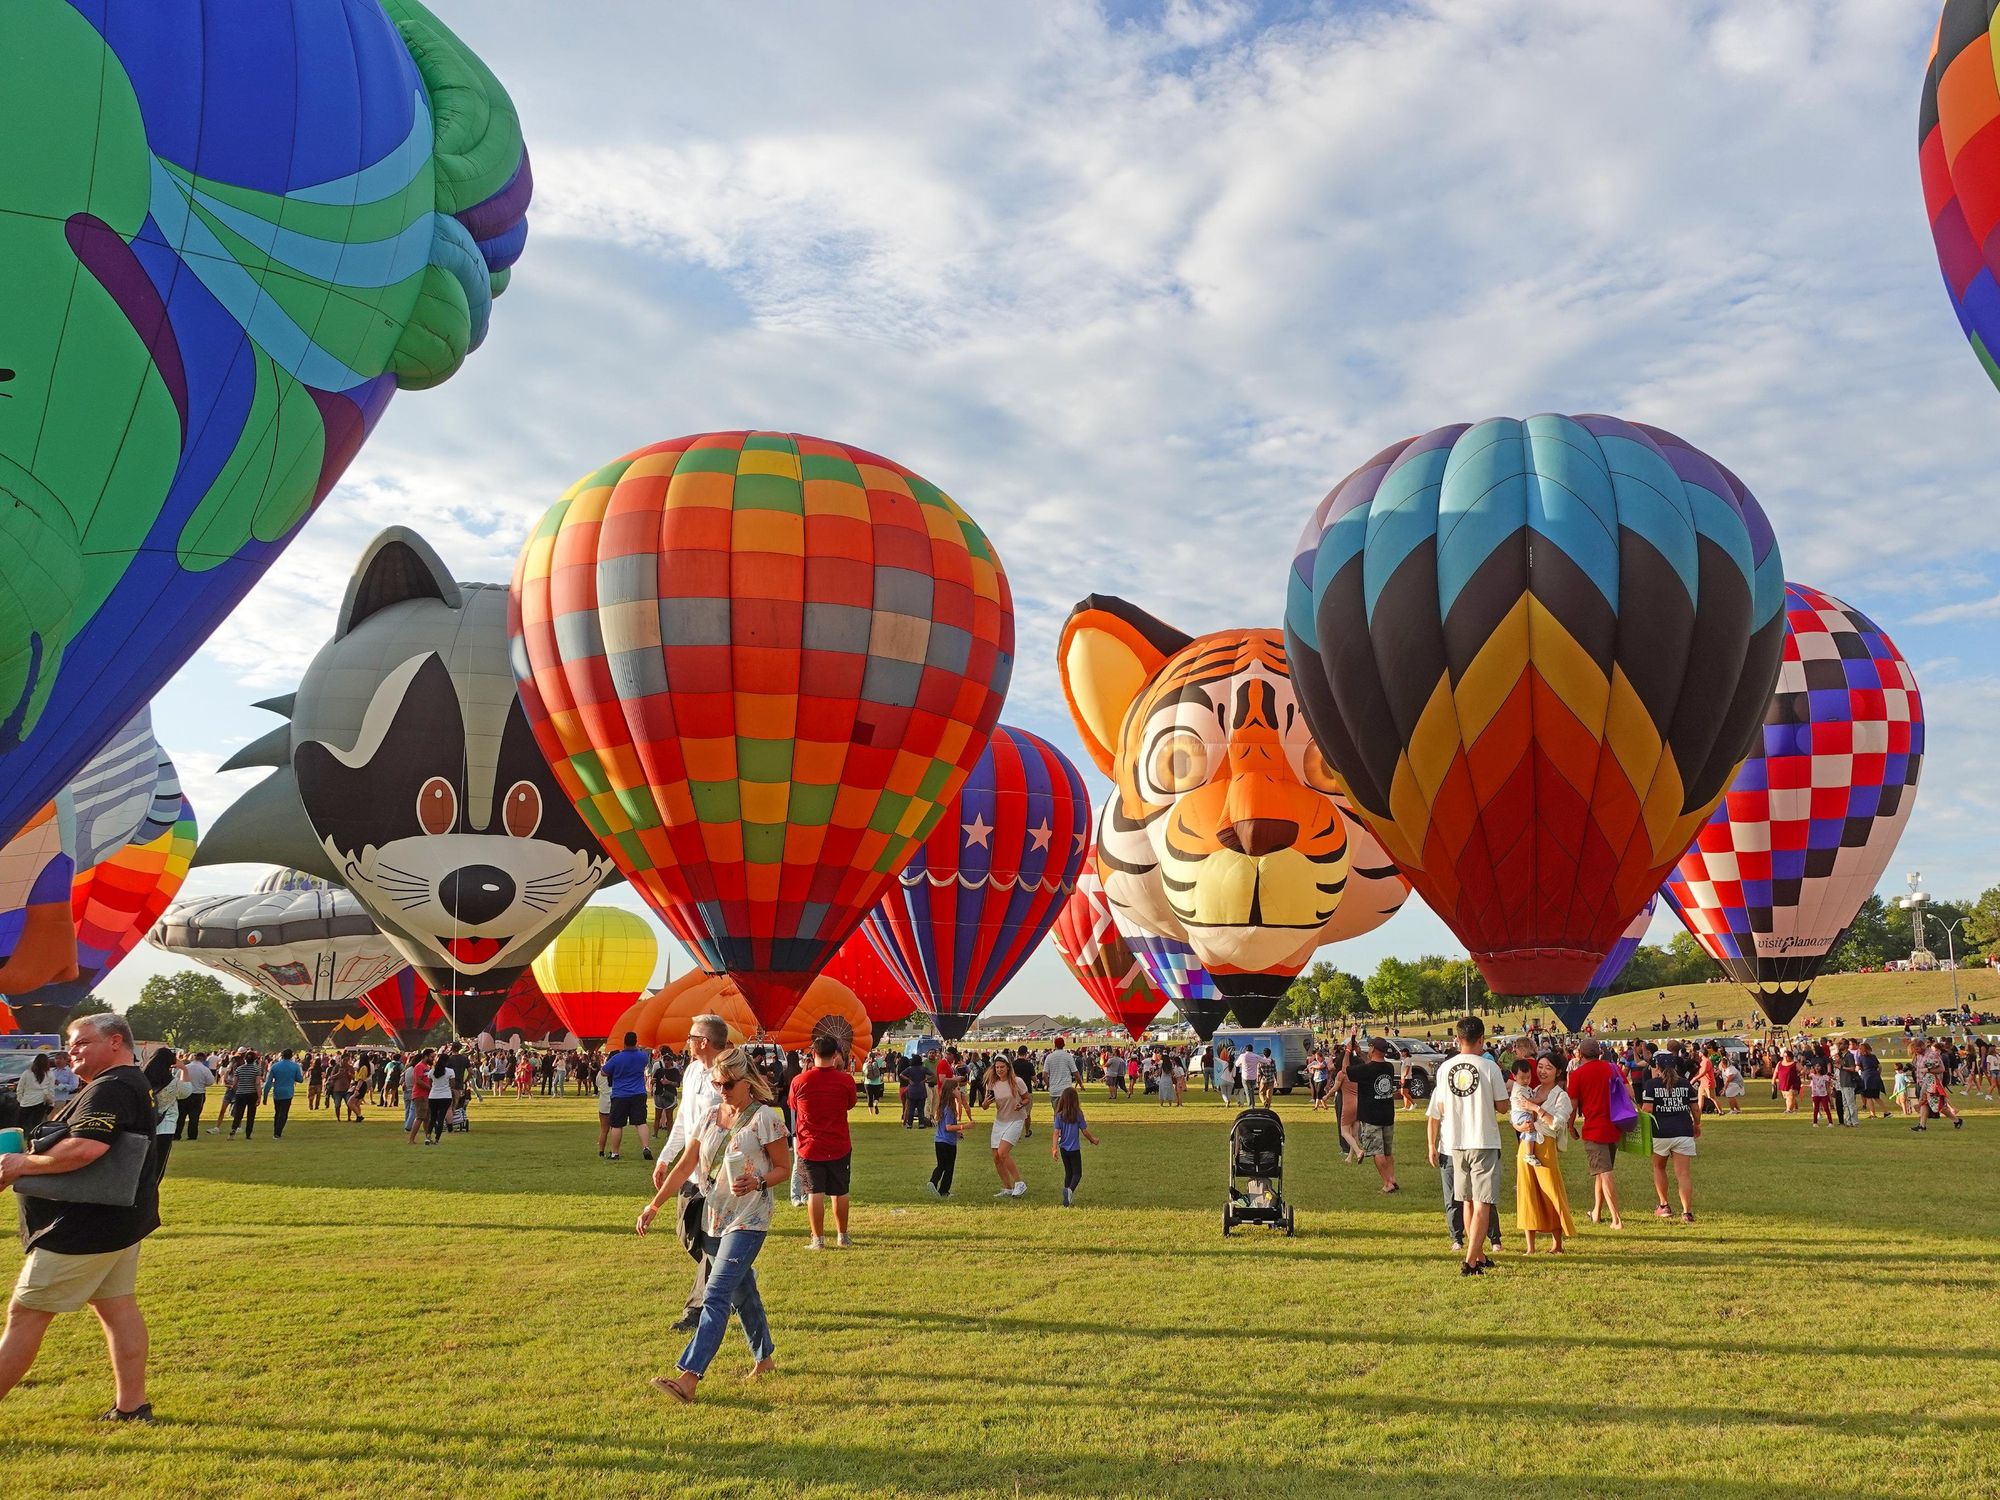 Your guide to the big balloon festival that lights up Plano in